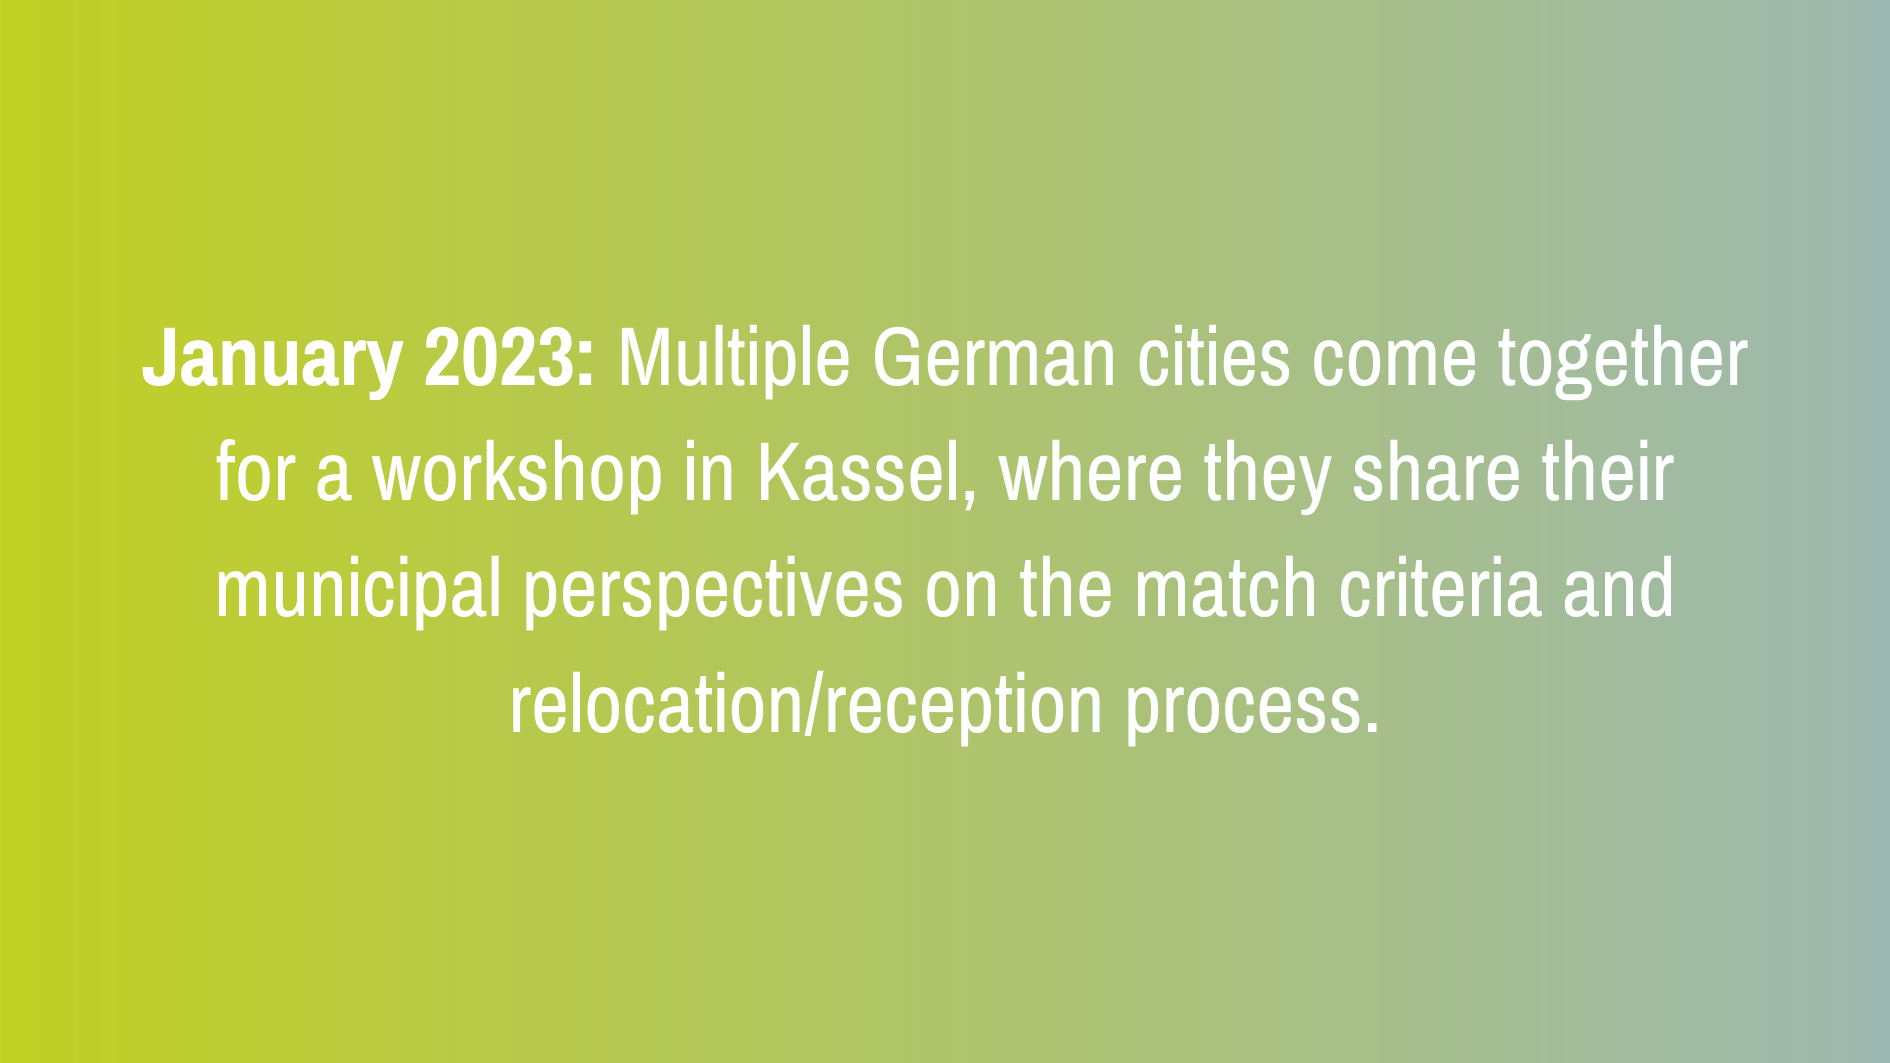 January 2023: Multiple German cities come together for a workshop in Kassel, where they share their municipal perspectives on the match criteria and relocation/reception process.